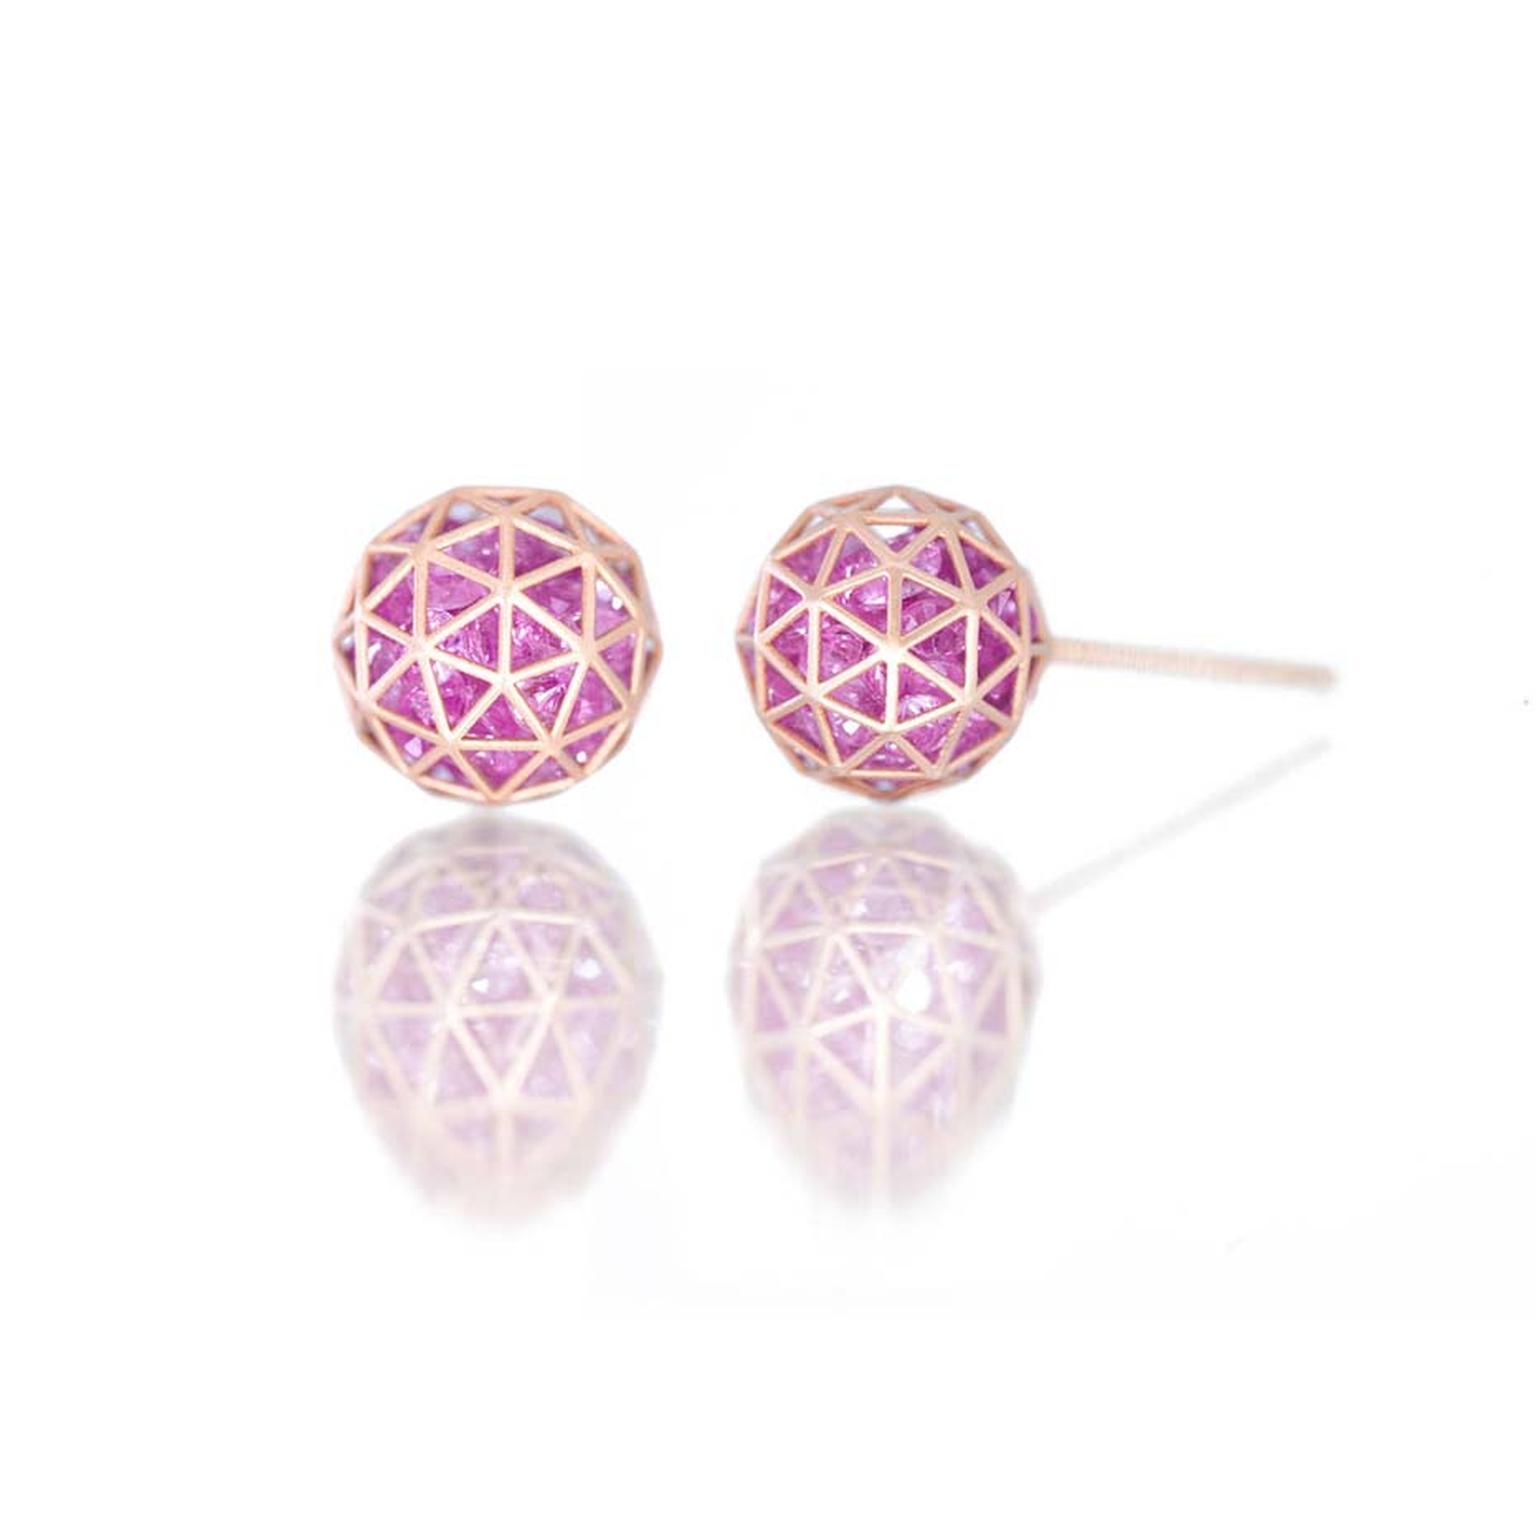 Beautiful Shaker stud earrings filled with loose pink sapphires by Roule & Co ($1,495), available from 1stdibs.